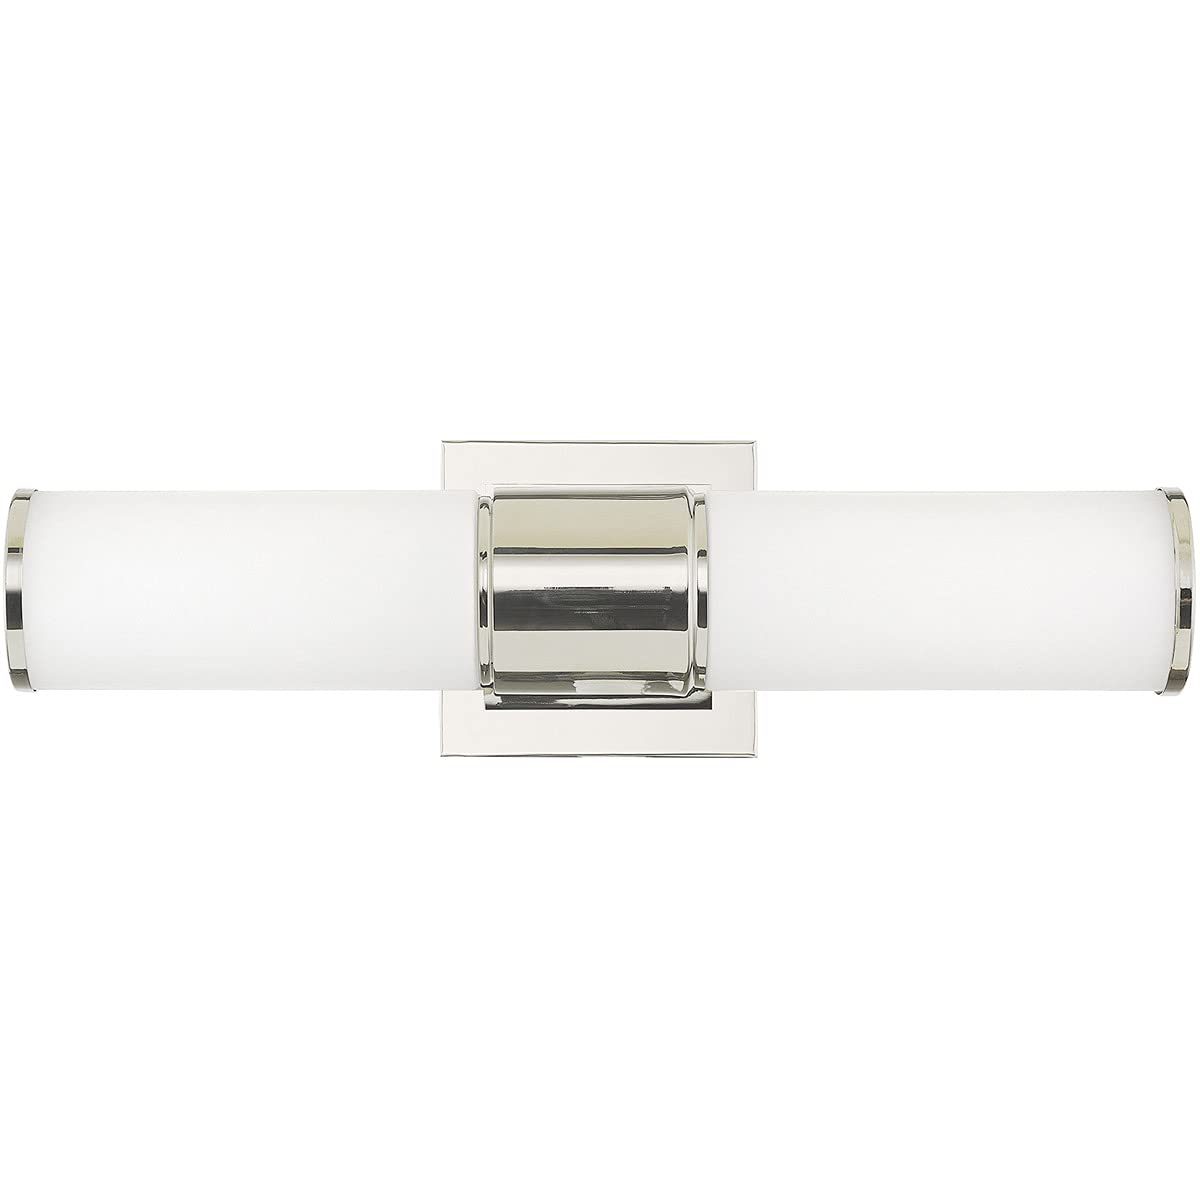 Livex 52122-35 Transitional Two Wall Sconce/Bath Light from Weston Collection in Polished Nickel Finish